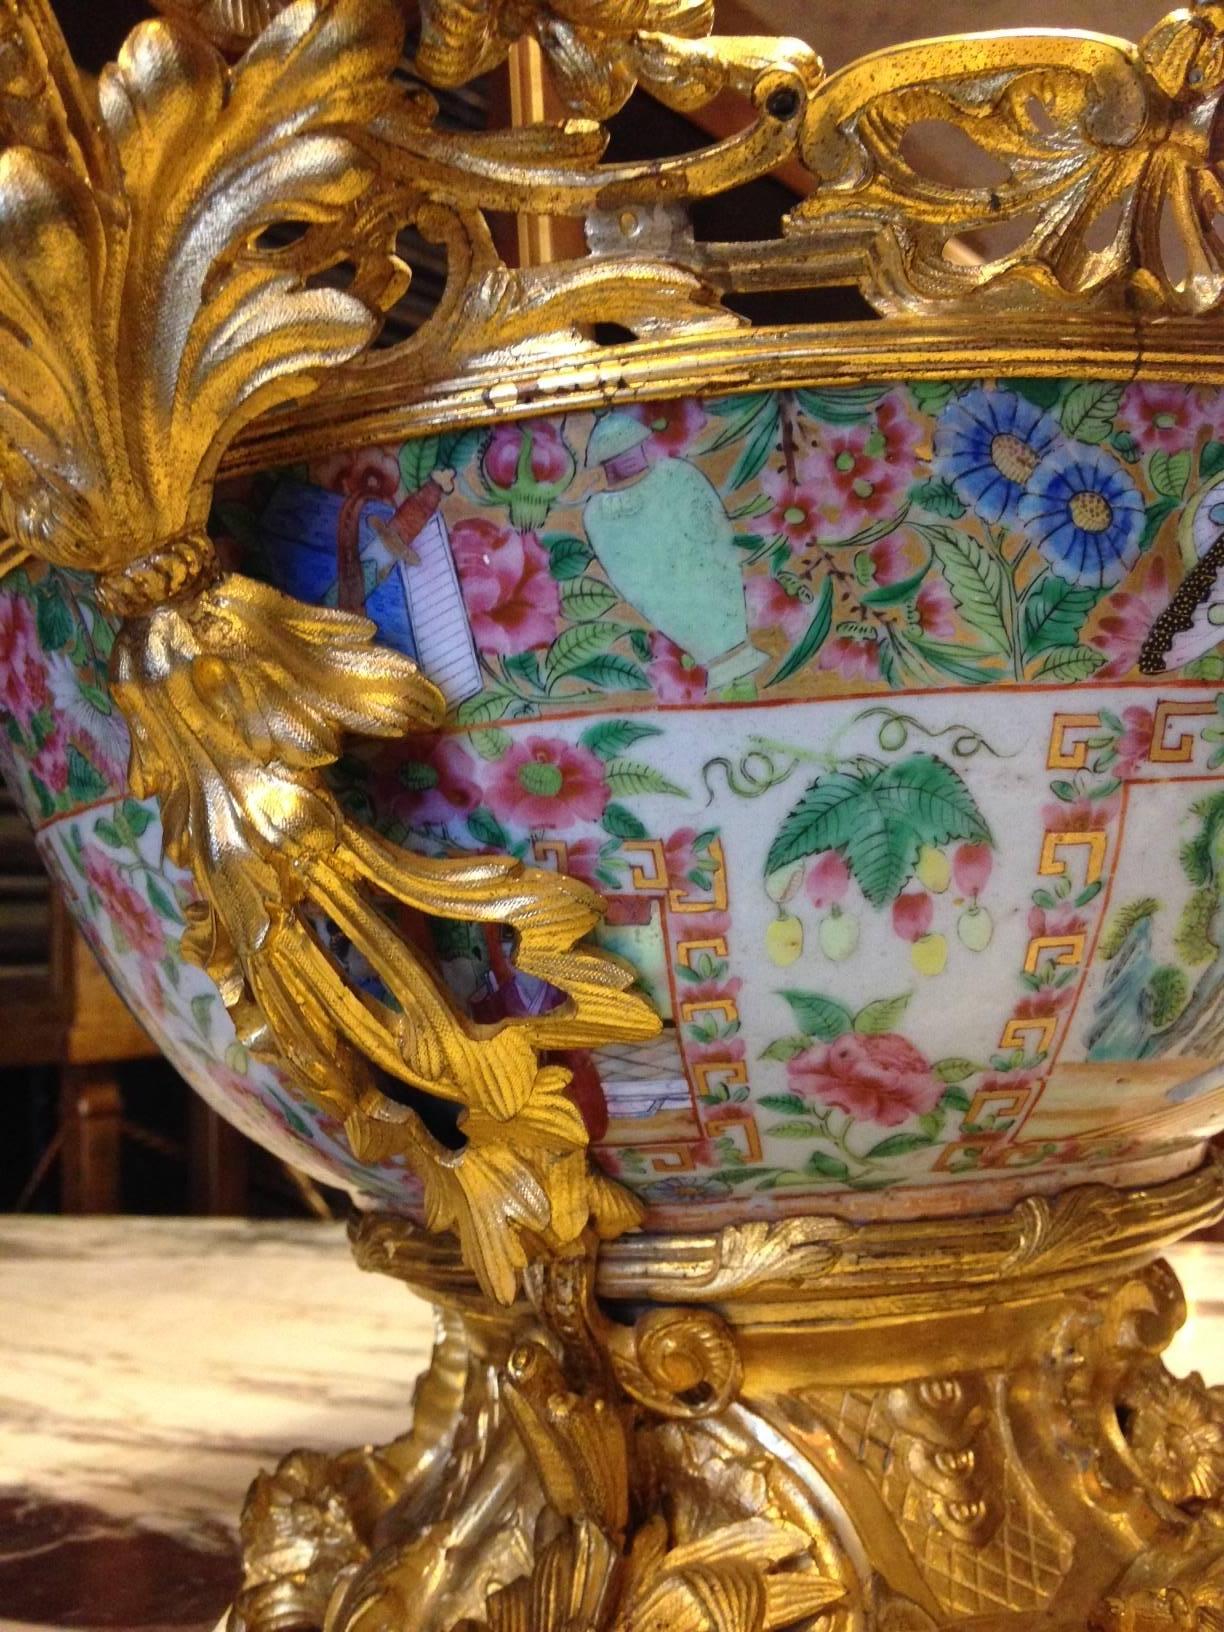 Very beautiful cup in porcelain of Canton with gilded bronze mount.
Napoleon III period.
Very nice quality of carving and beautiful gilding.
In perfect condition.
Not signed.
Attributed to Henry Dasson.

Dimension: Height 30 cm x diameter 33